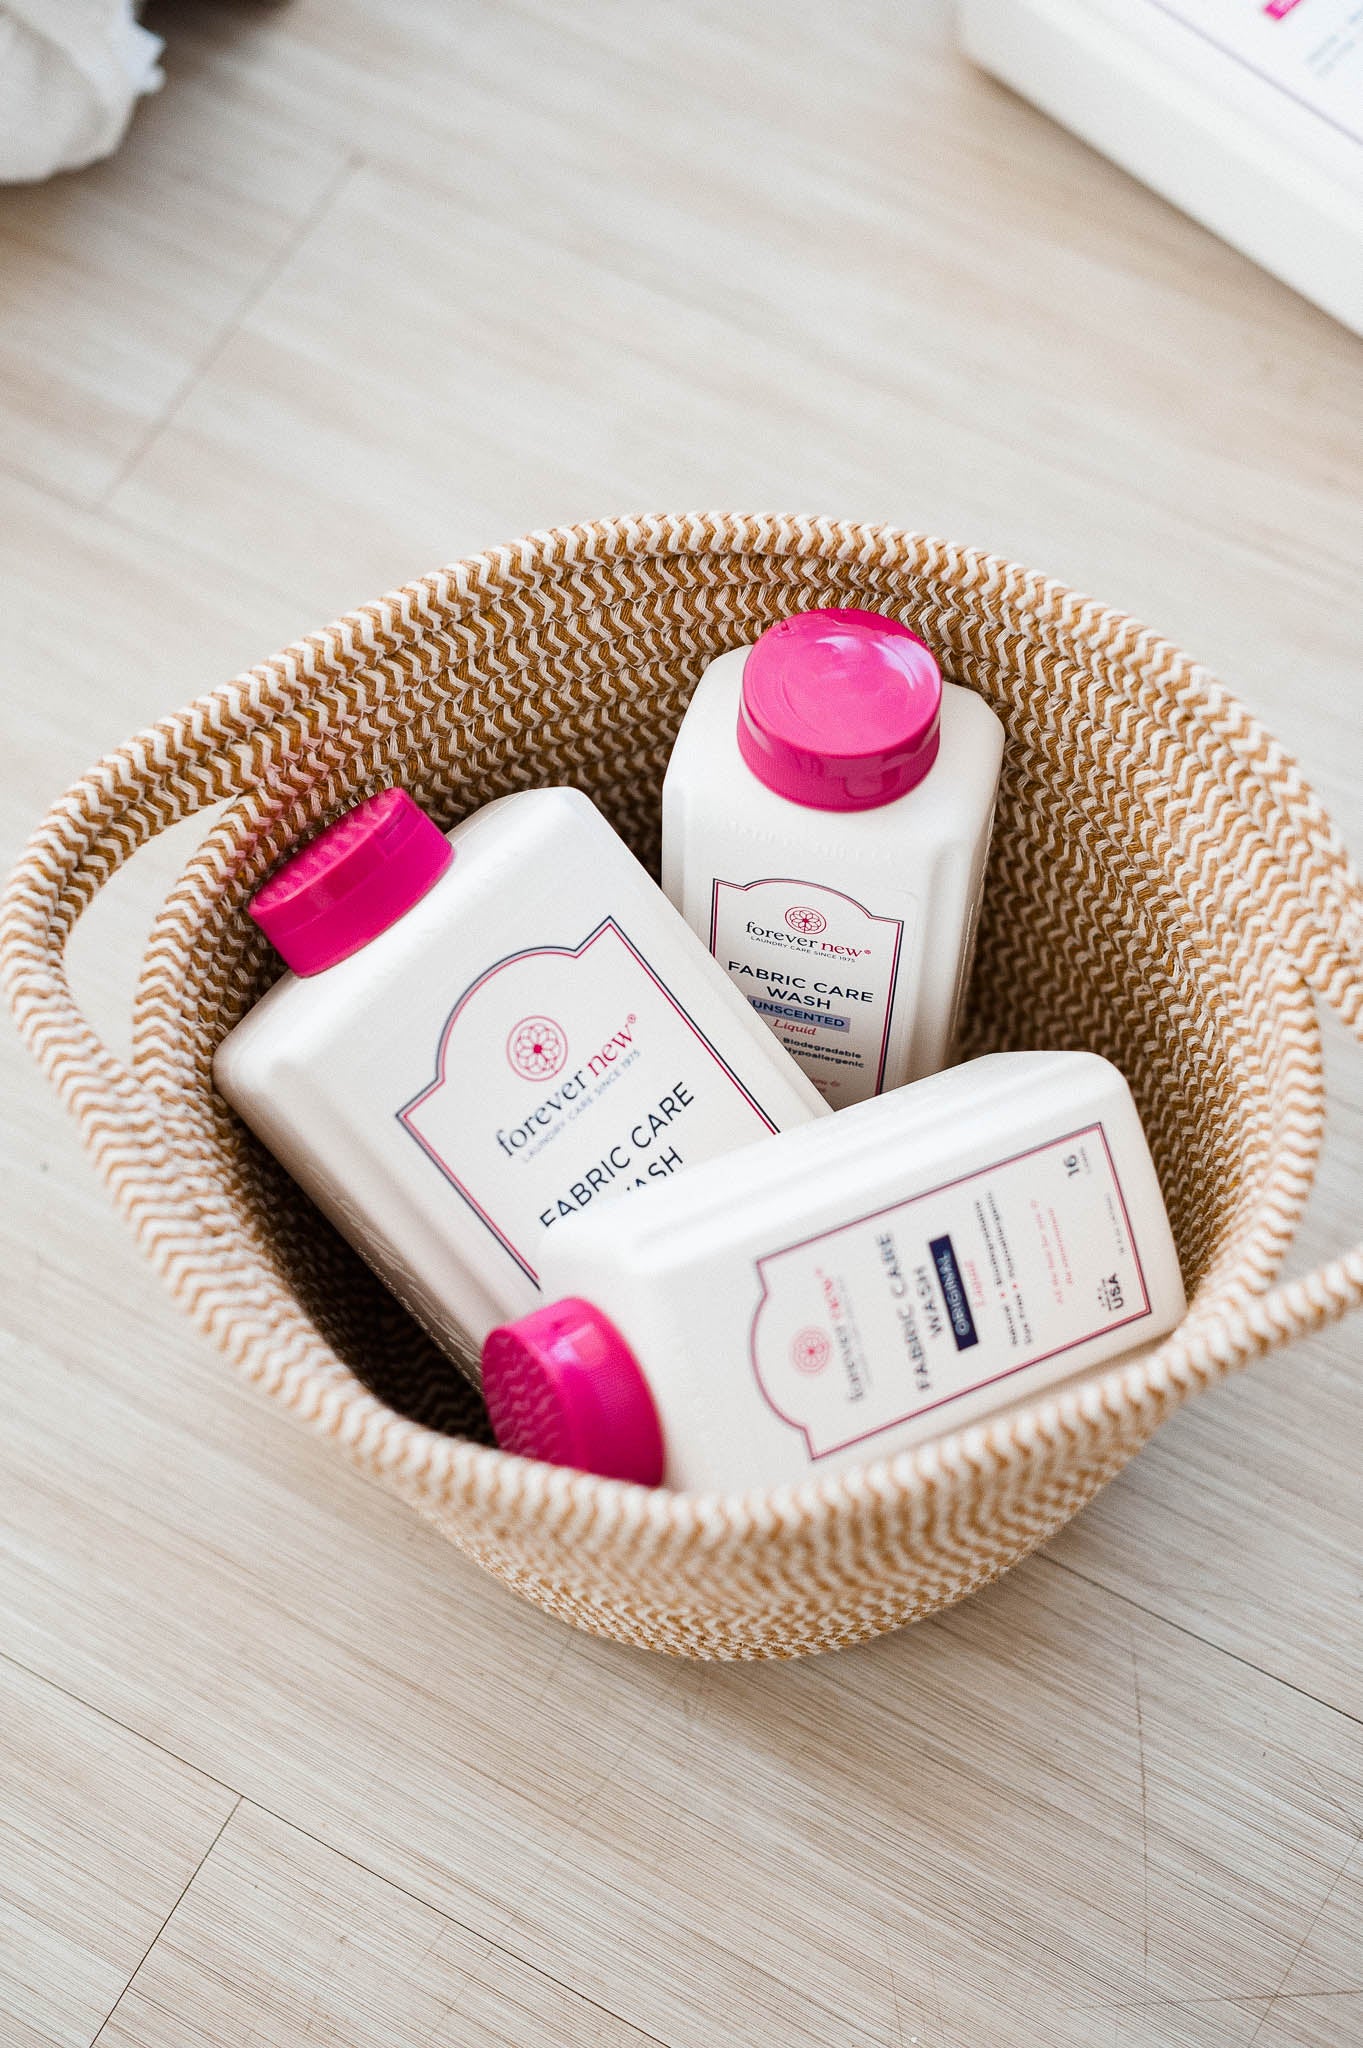 Forever new products in a basket